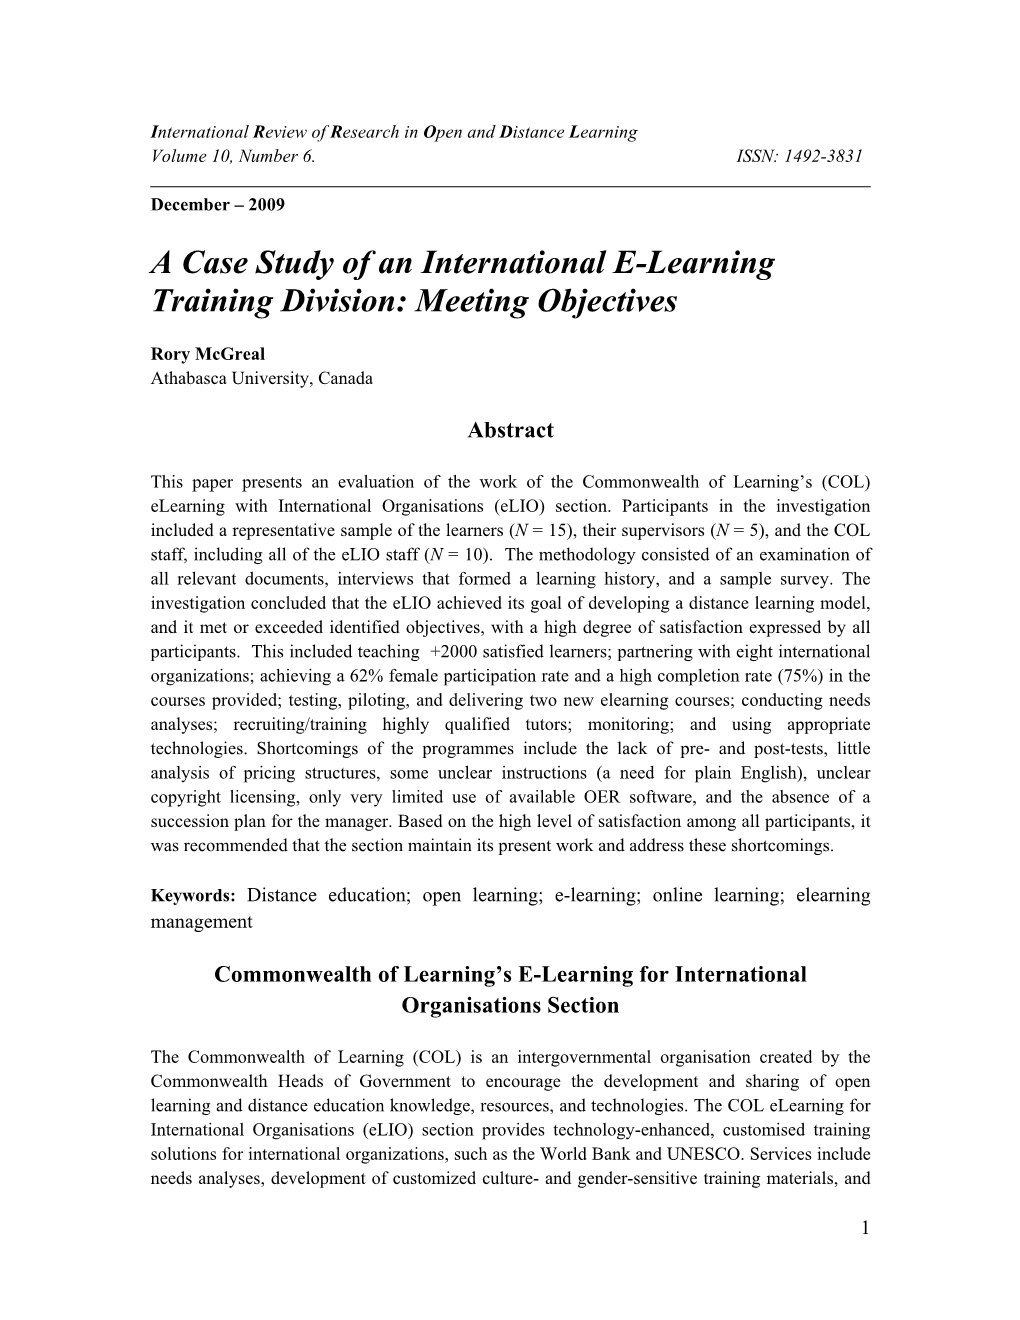 A Case Study of an International E-Learning Training Division: Meeting Objectives